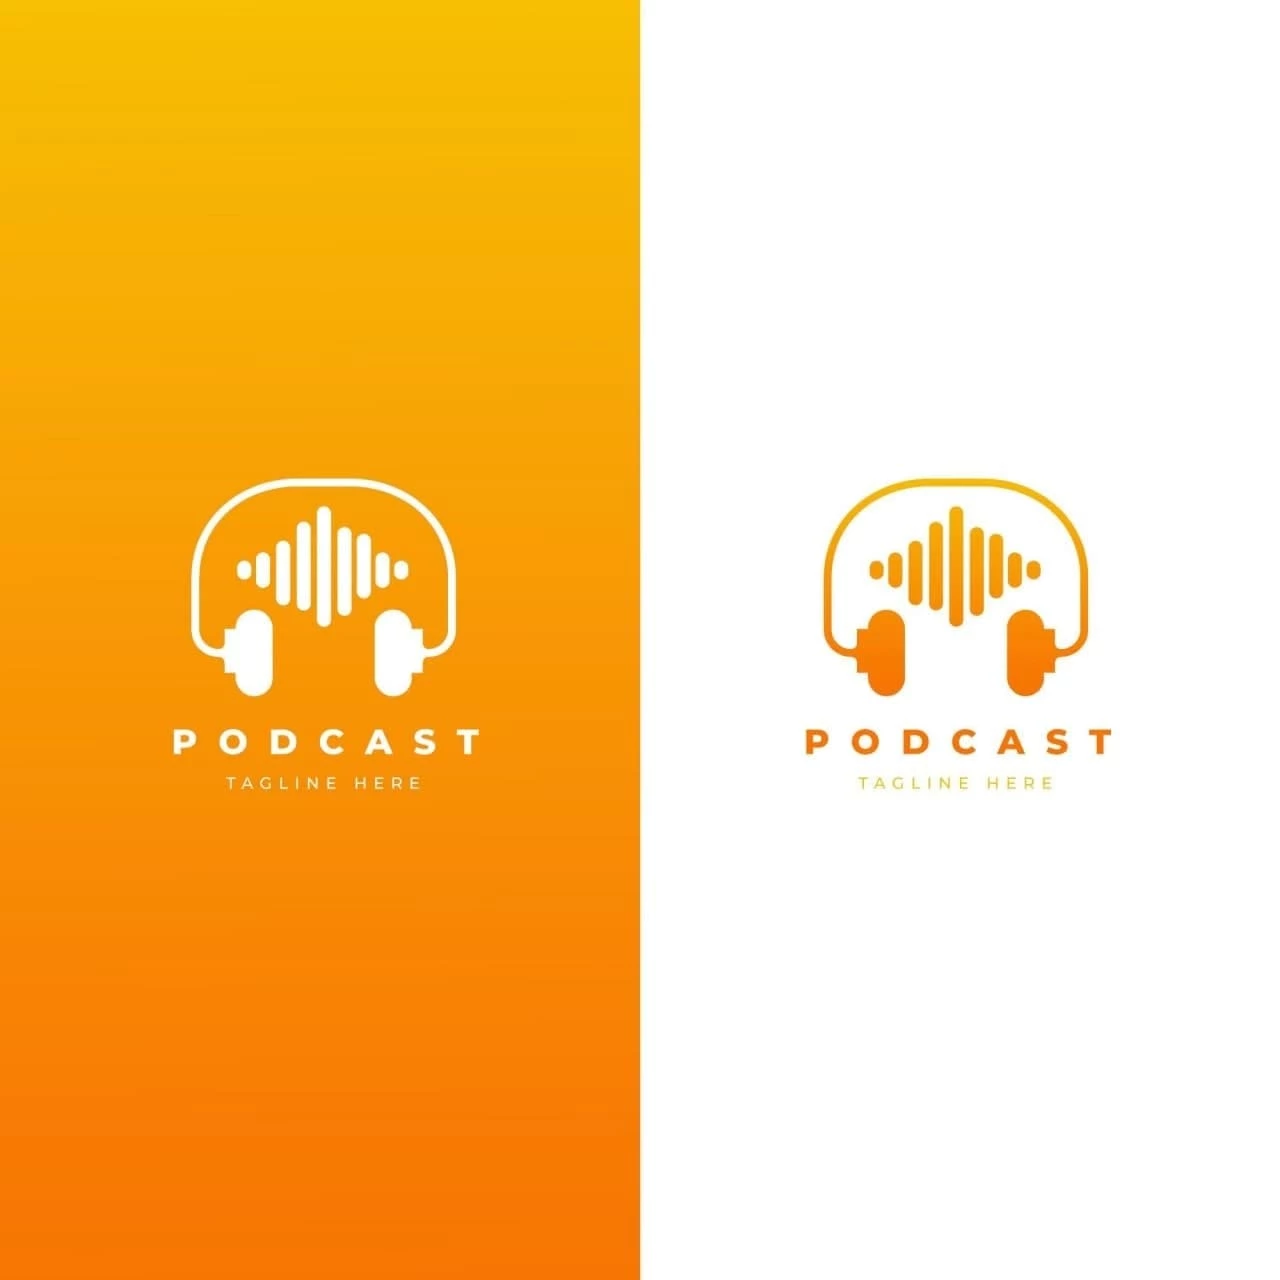 detailed-podcast-logo-template